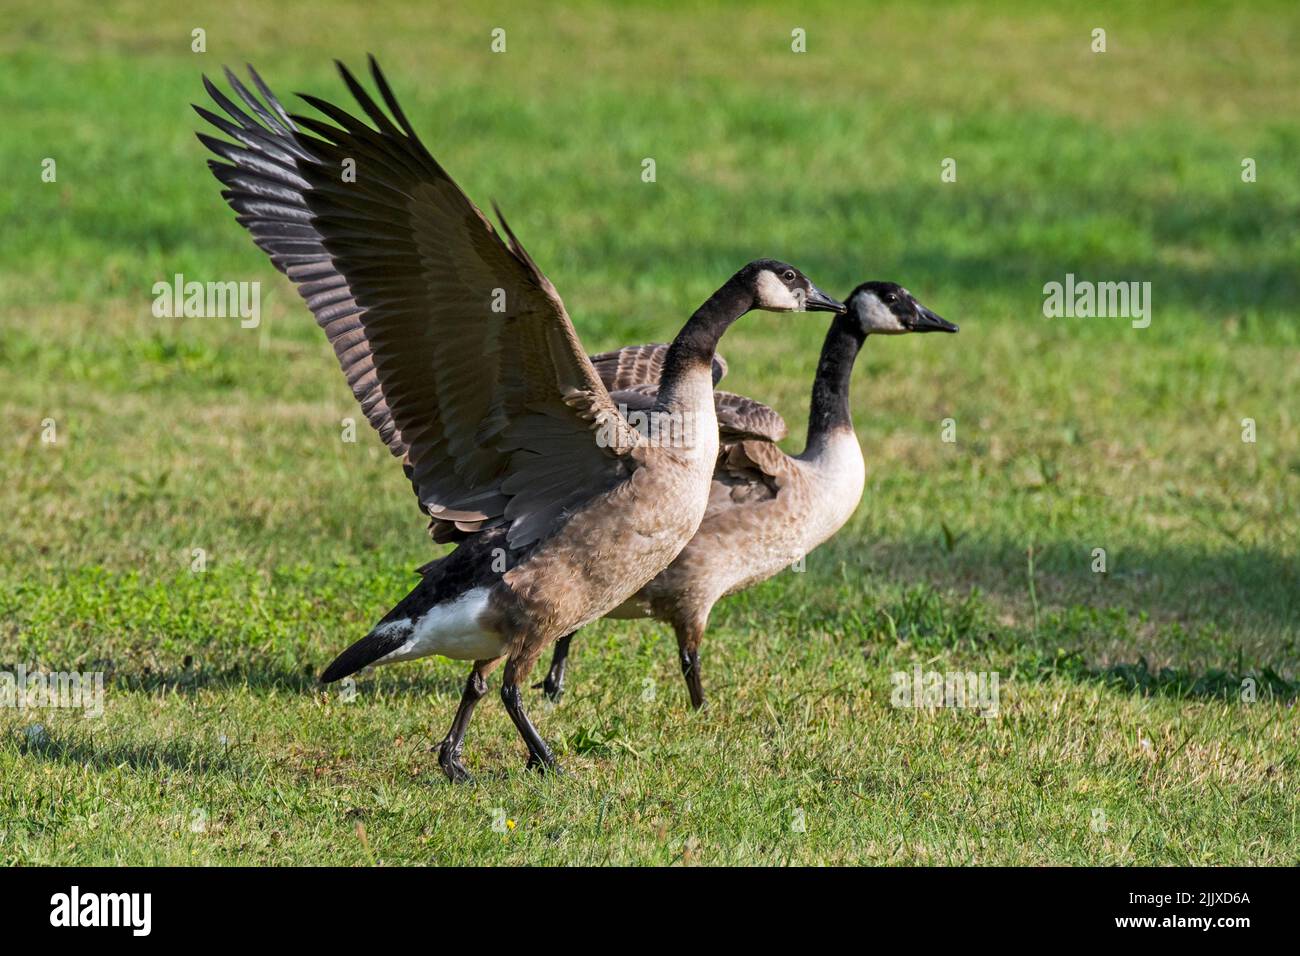 Two Canada geese (Branta canadensis) flapping their wings in meadow / grassland Stock Photo